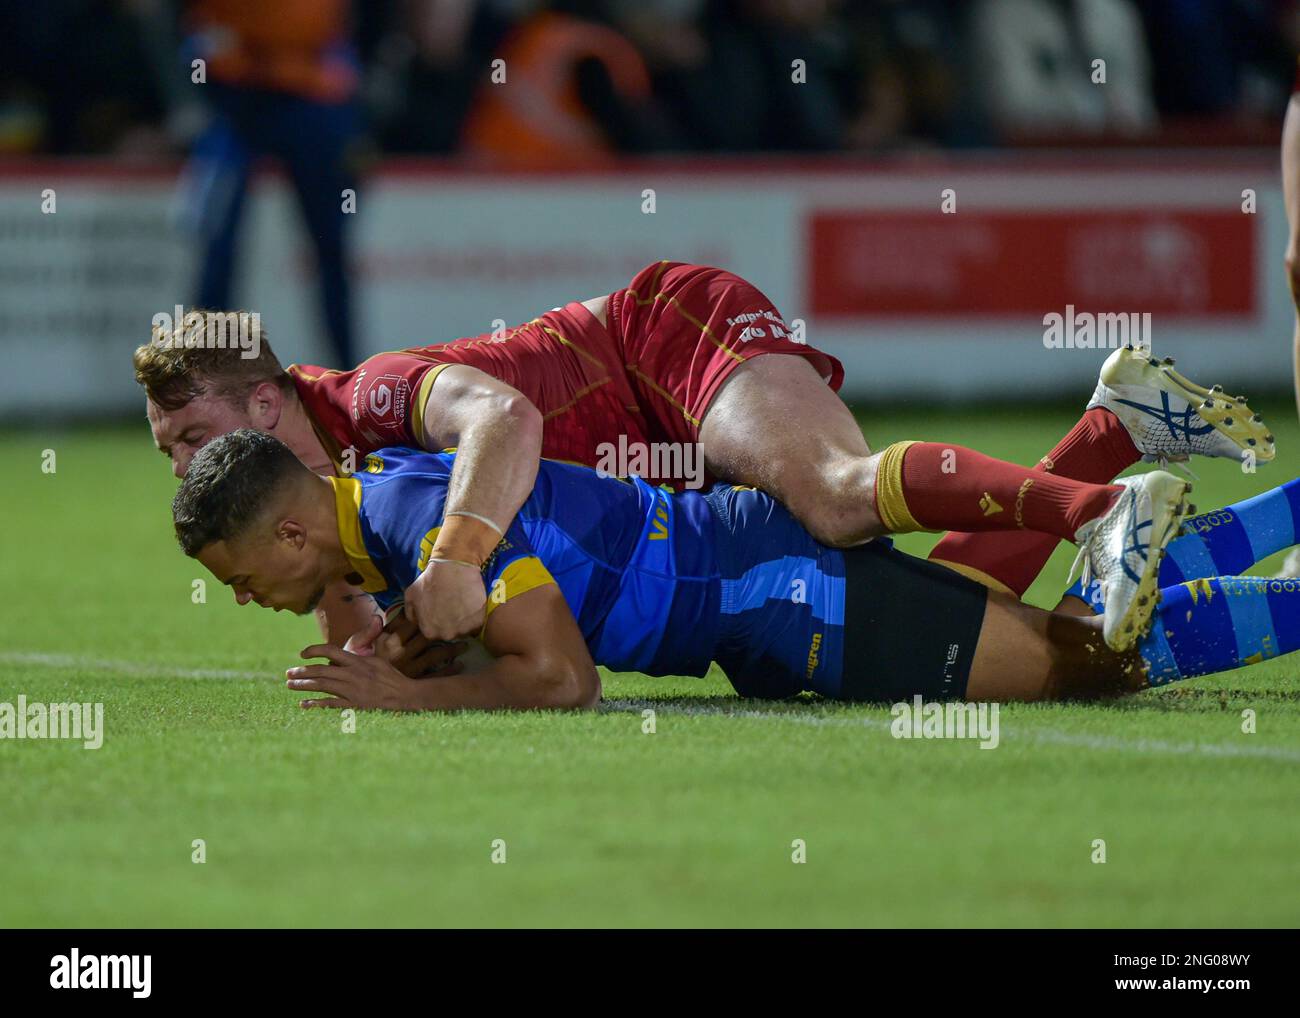 Wakefield, UK. 17th Feb, 2023. Corey Hall of Wakefield Trinity scores a try   Wakefield Trinity v Catalan Dragons,  at the Bell vue, Wakefield, West Yorkshire, UK on the 17th February 2023  Photo Credit Craig Cresswell Photography Credit: Craig Cresswell/Alamy Live News Stock Photo